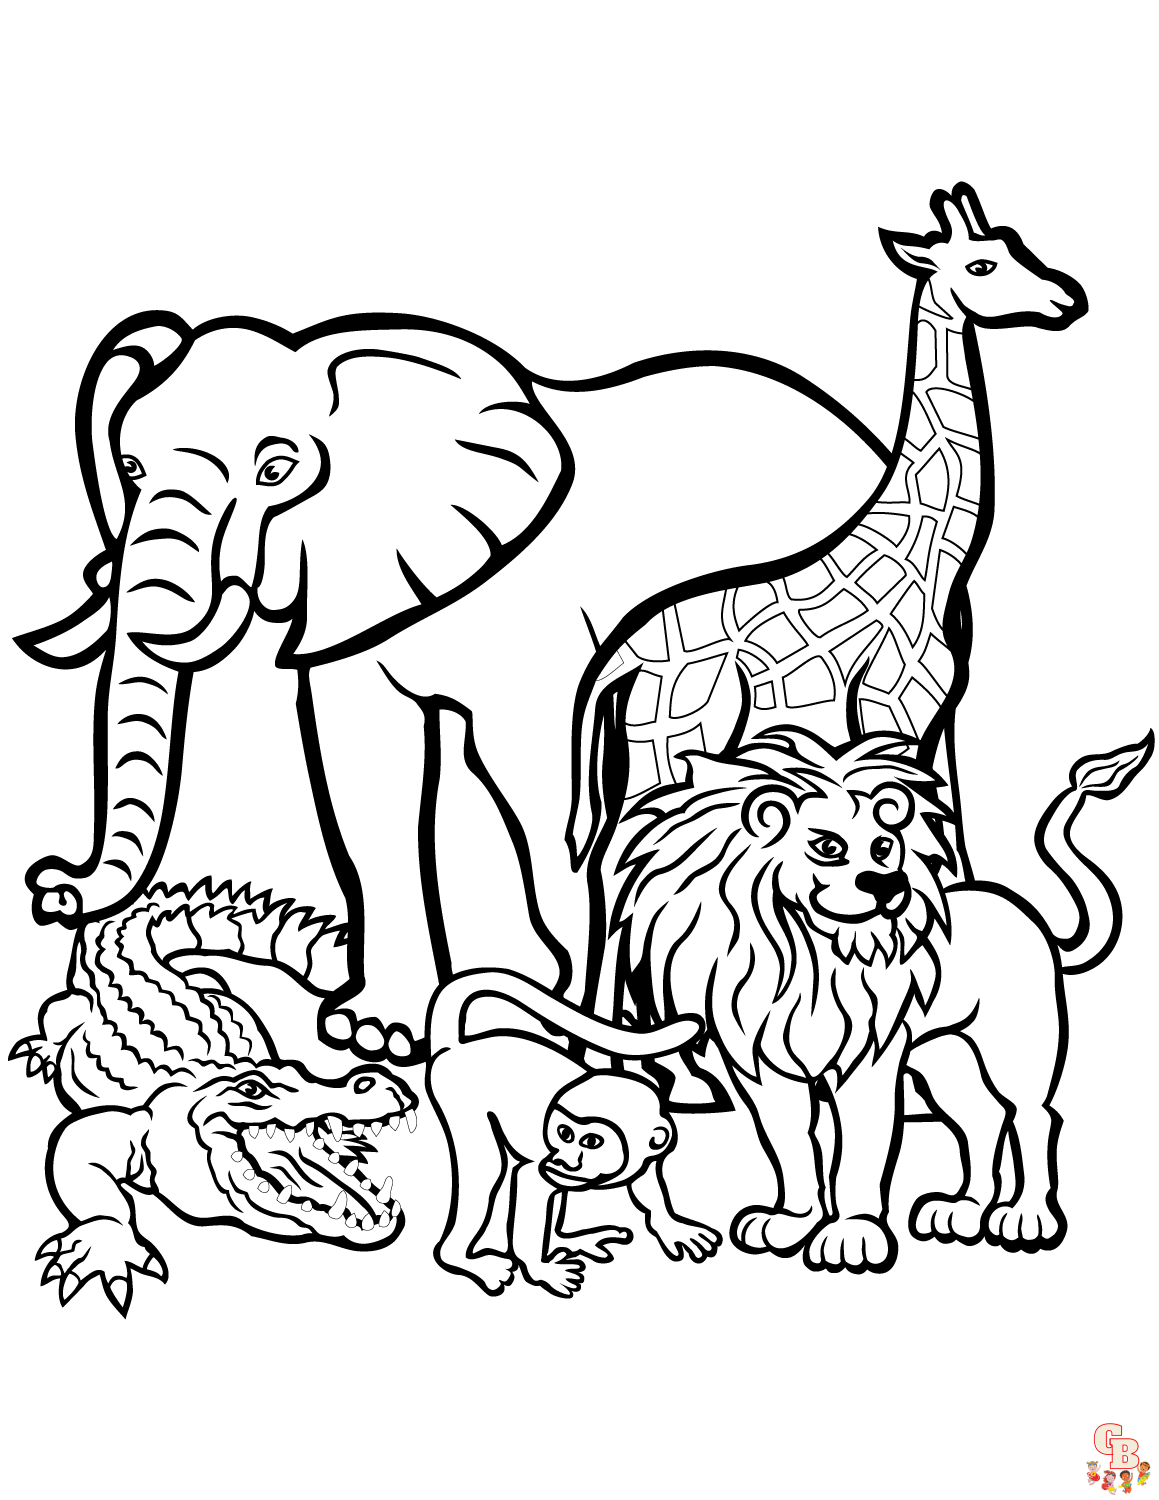 1548315523 african animals coloring page